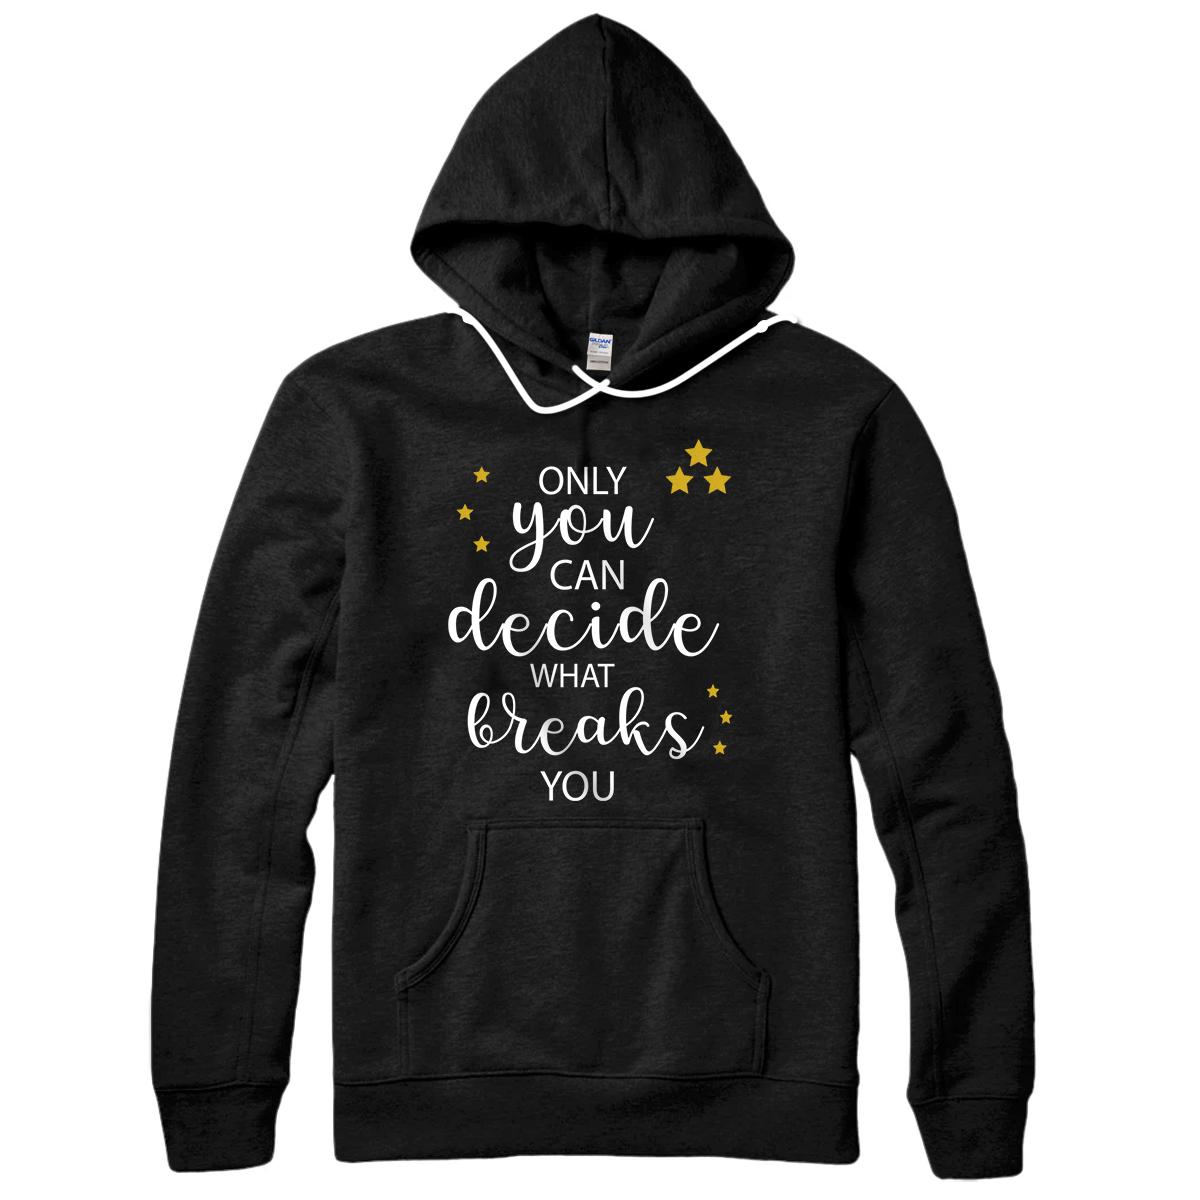 Personalized Bookworm ACOMAF Feyre bookish quote gift for book lovers Pullover Hoodie